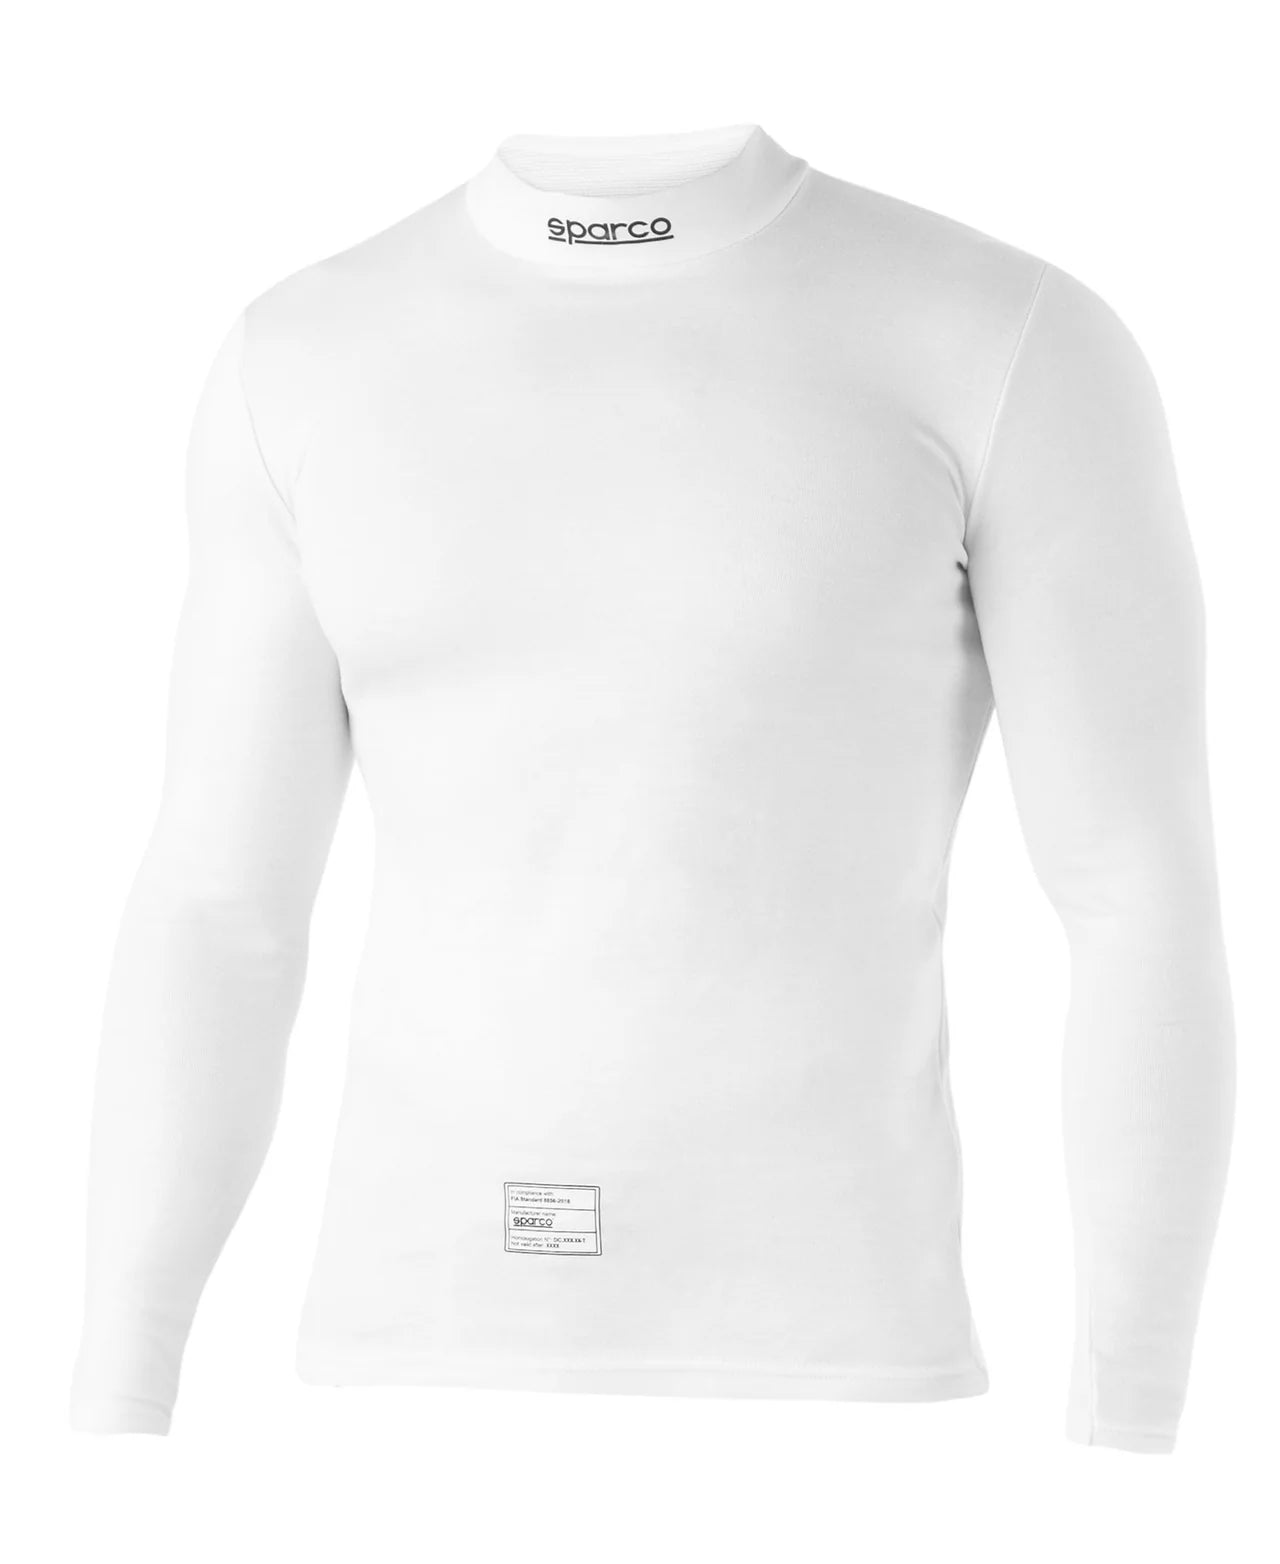 Sparco RW-7 Nomex Fireproof Shirt